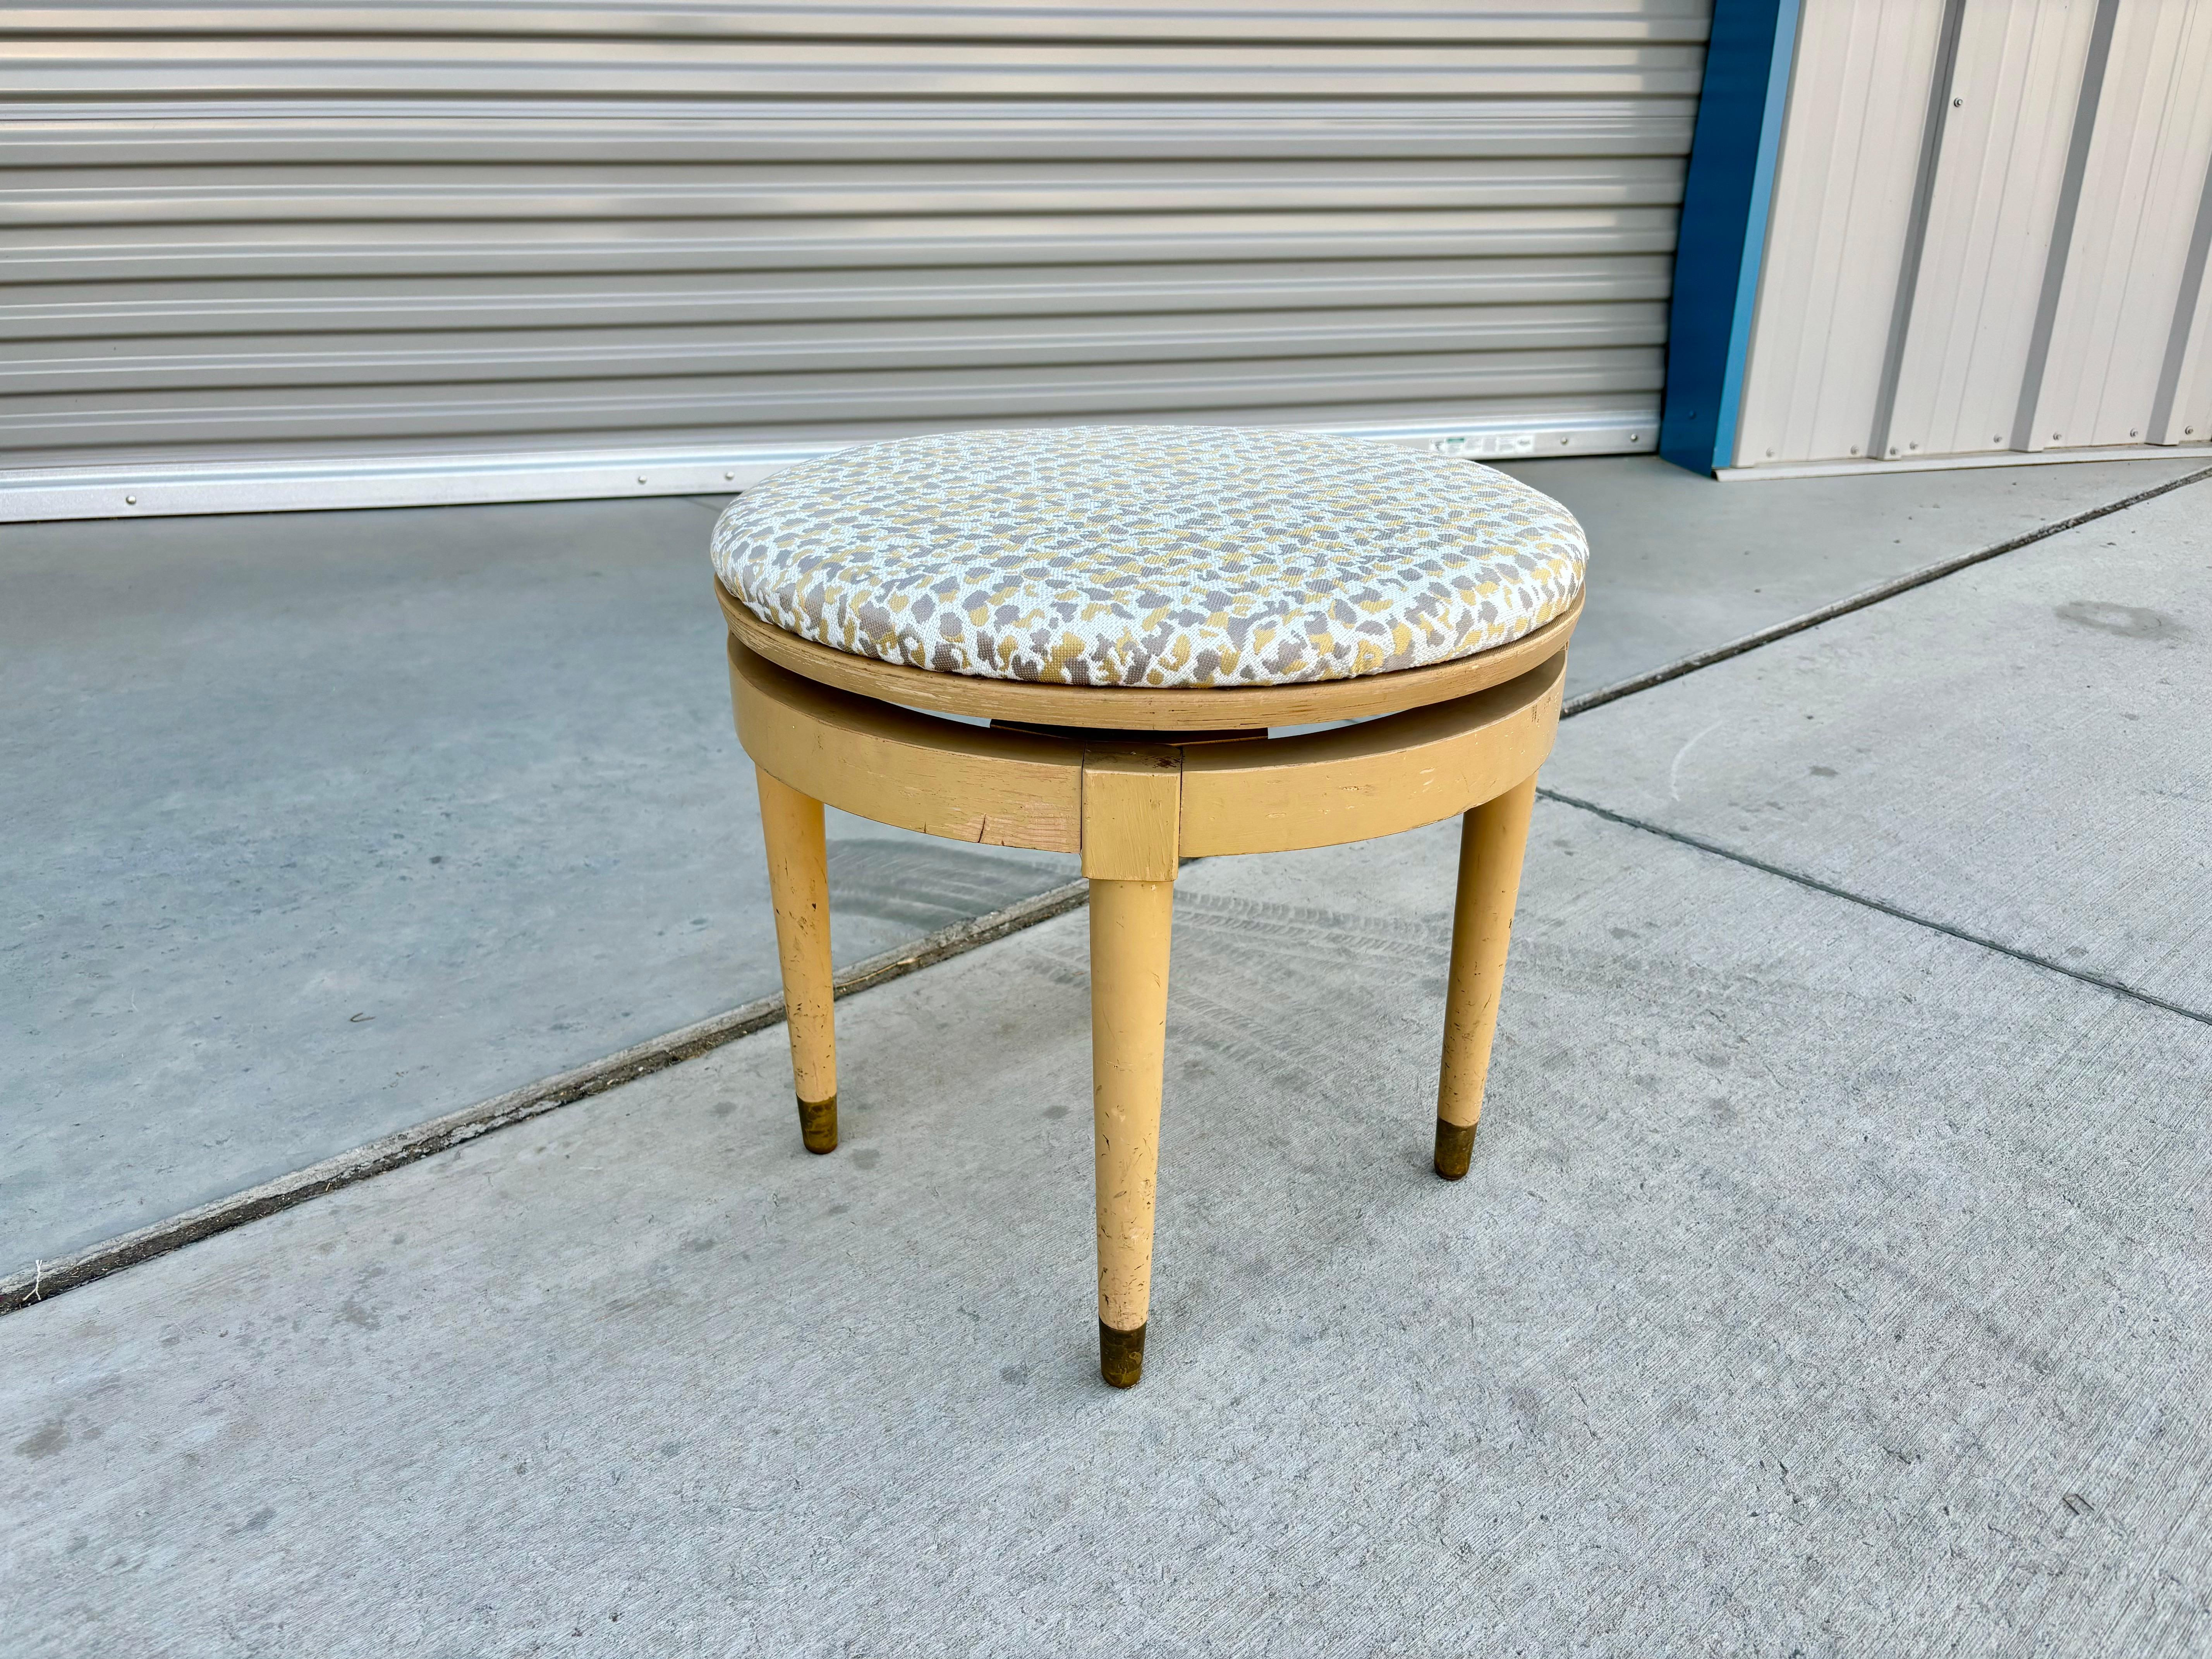 1970s Mid Century Modern Swivel Stool In Good Condition For Sale In North Hollywood, CA